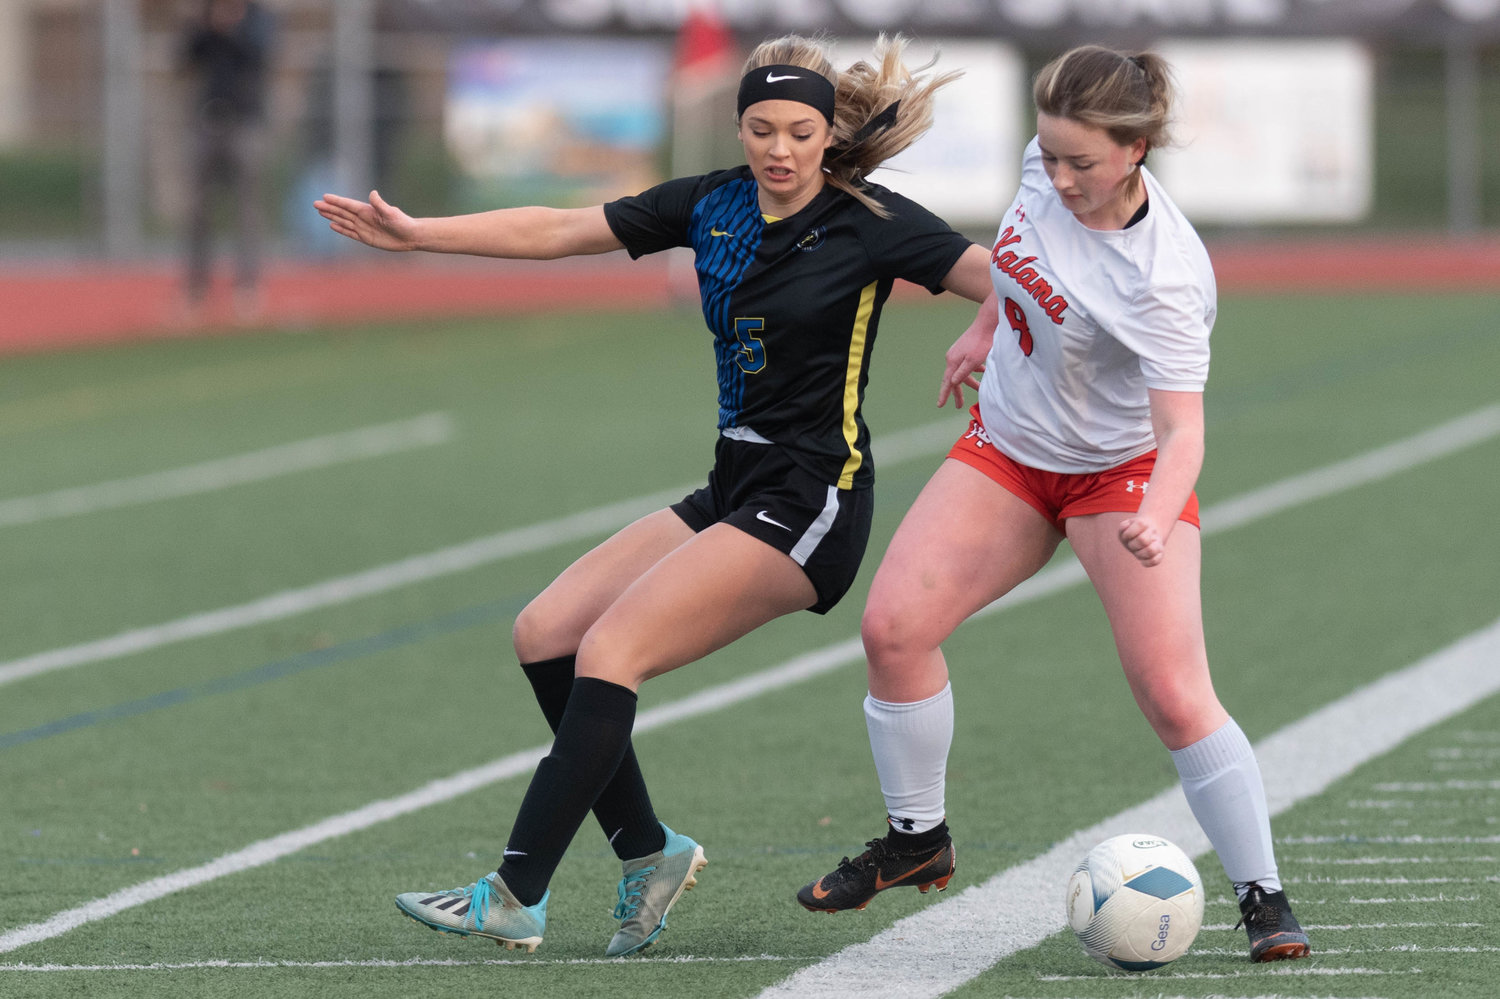 Adna's Kaylin Todd defends a Kalama player in the 2B state title game at Sunset Stadium Nov. 20.